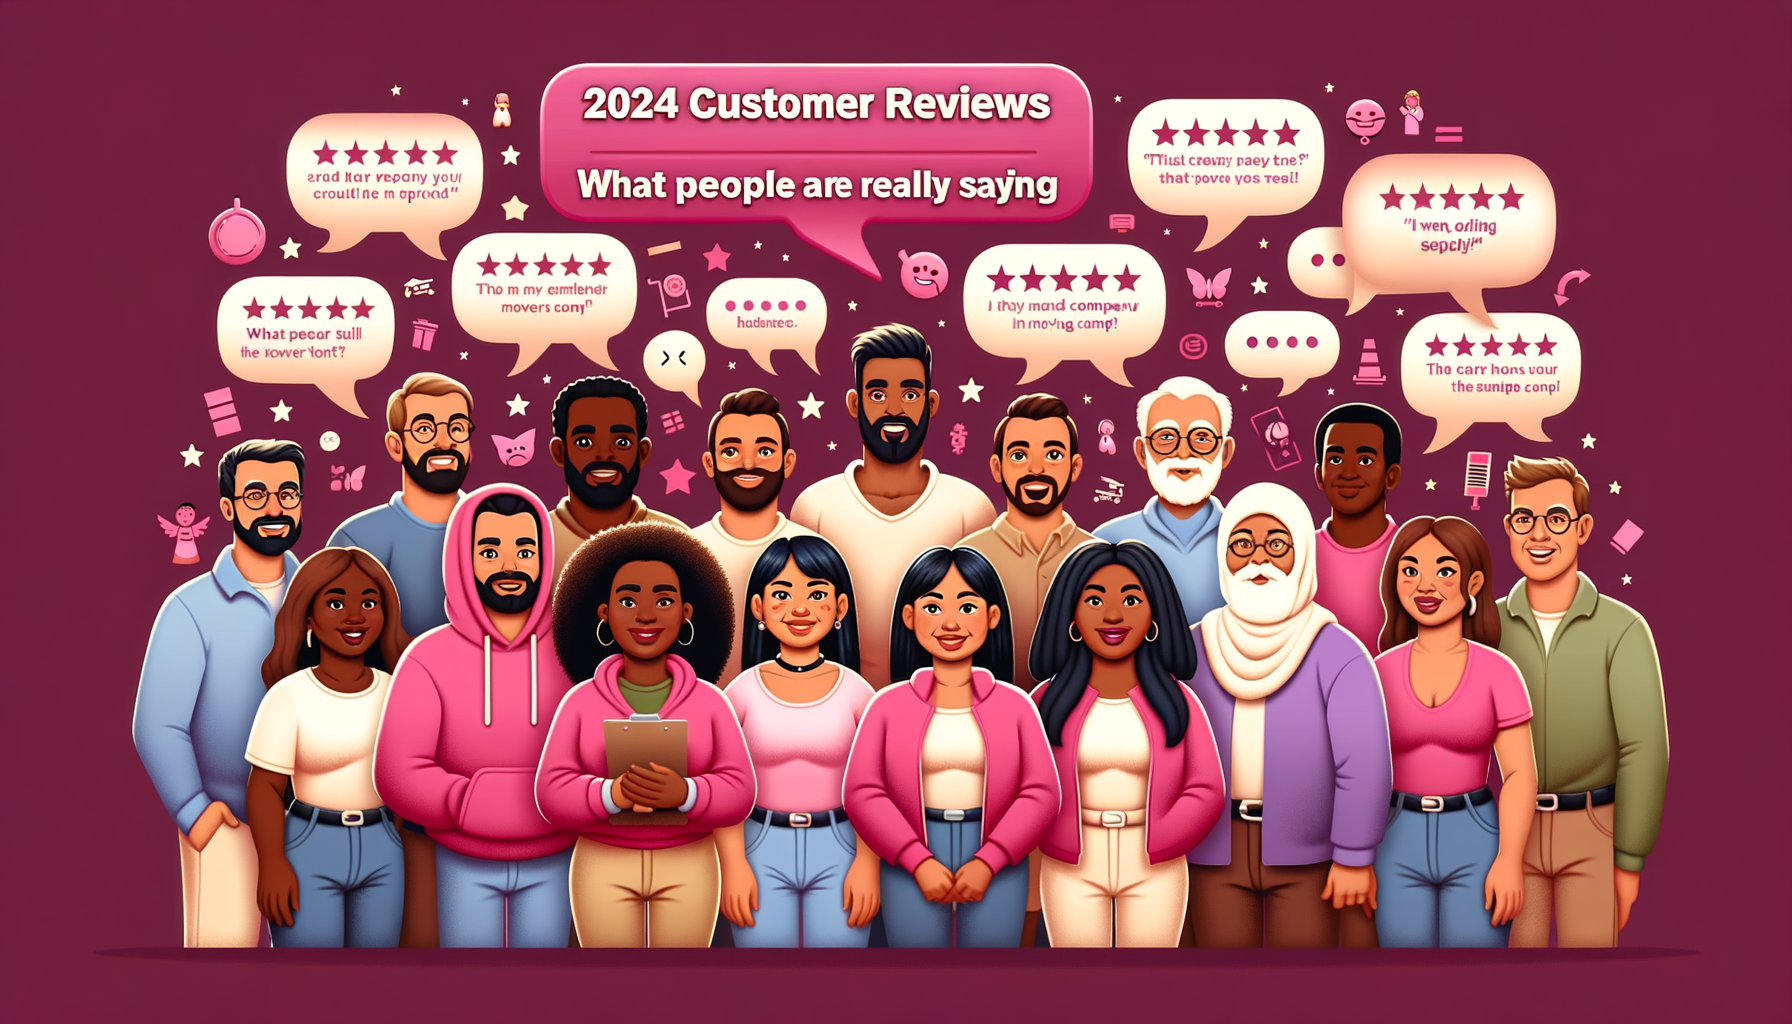 Cartoon-like fuschia image representing customer reviews in 2024 for Atlas Van Lines, featuring diverse animated characters sharing their real moving experiences with speech bubbles.